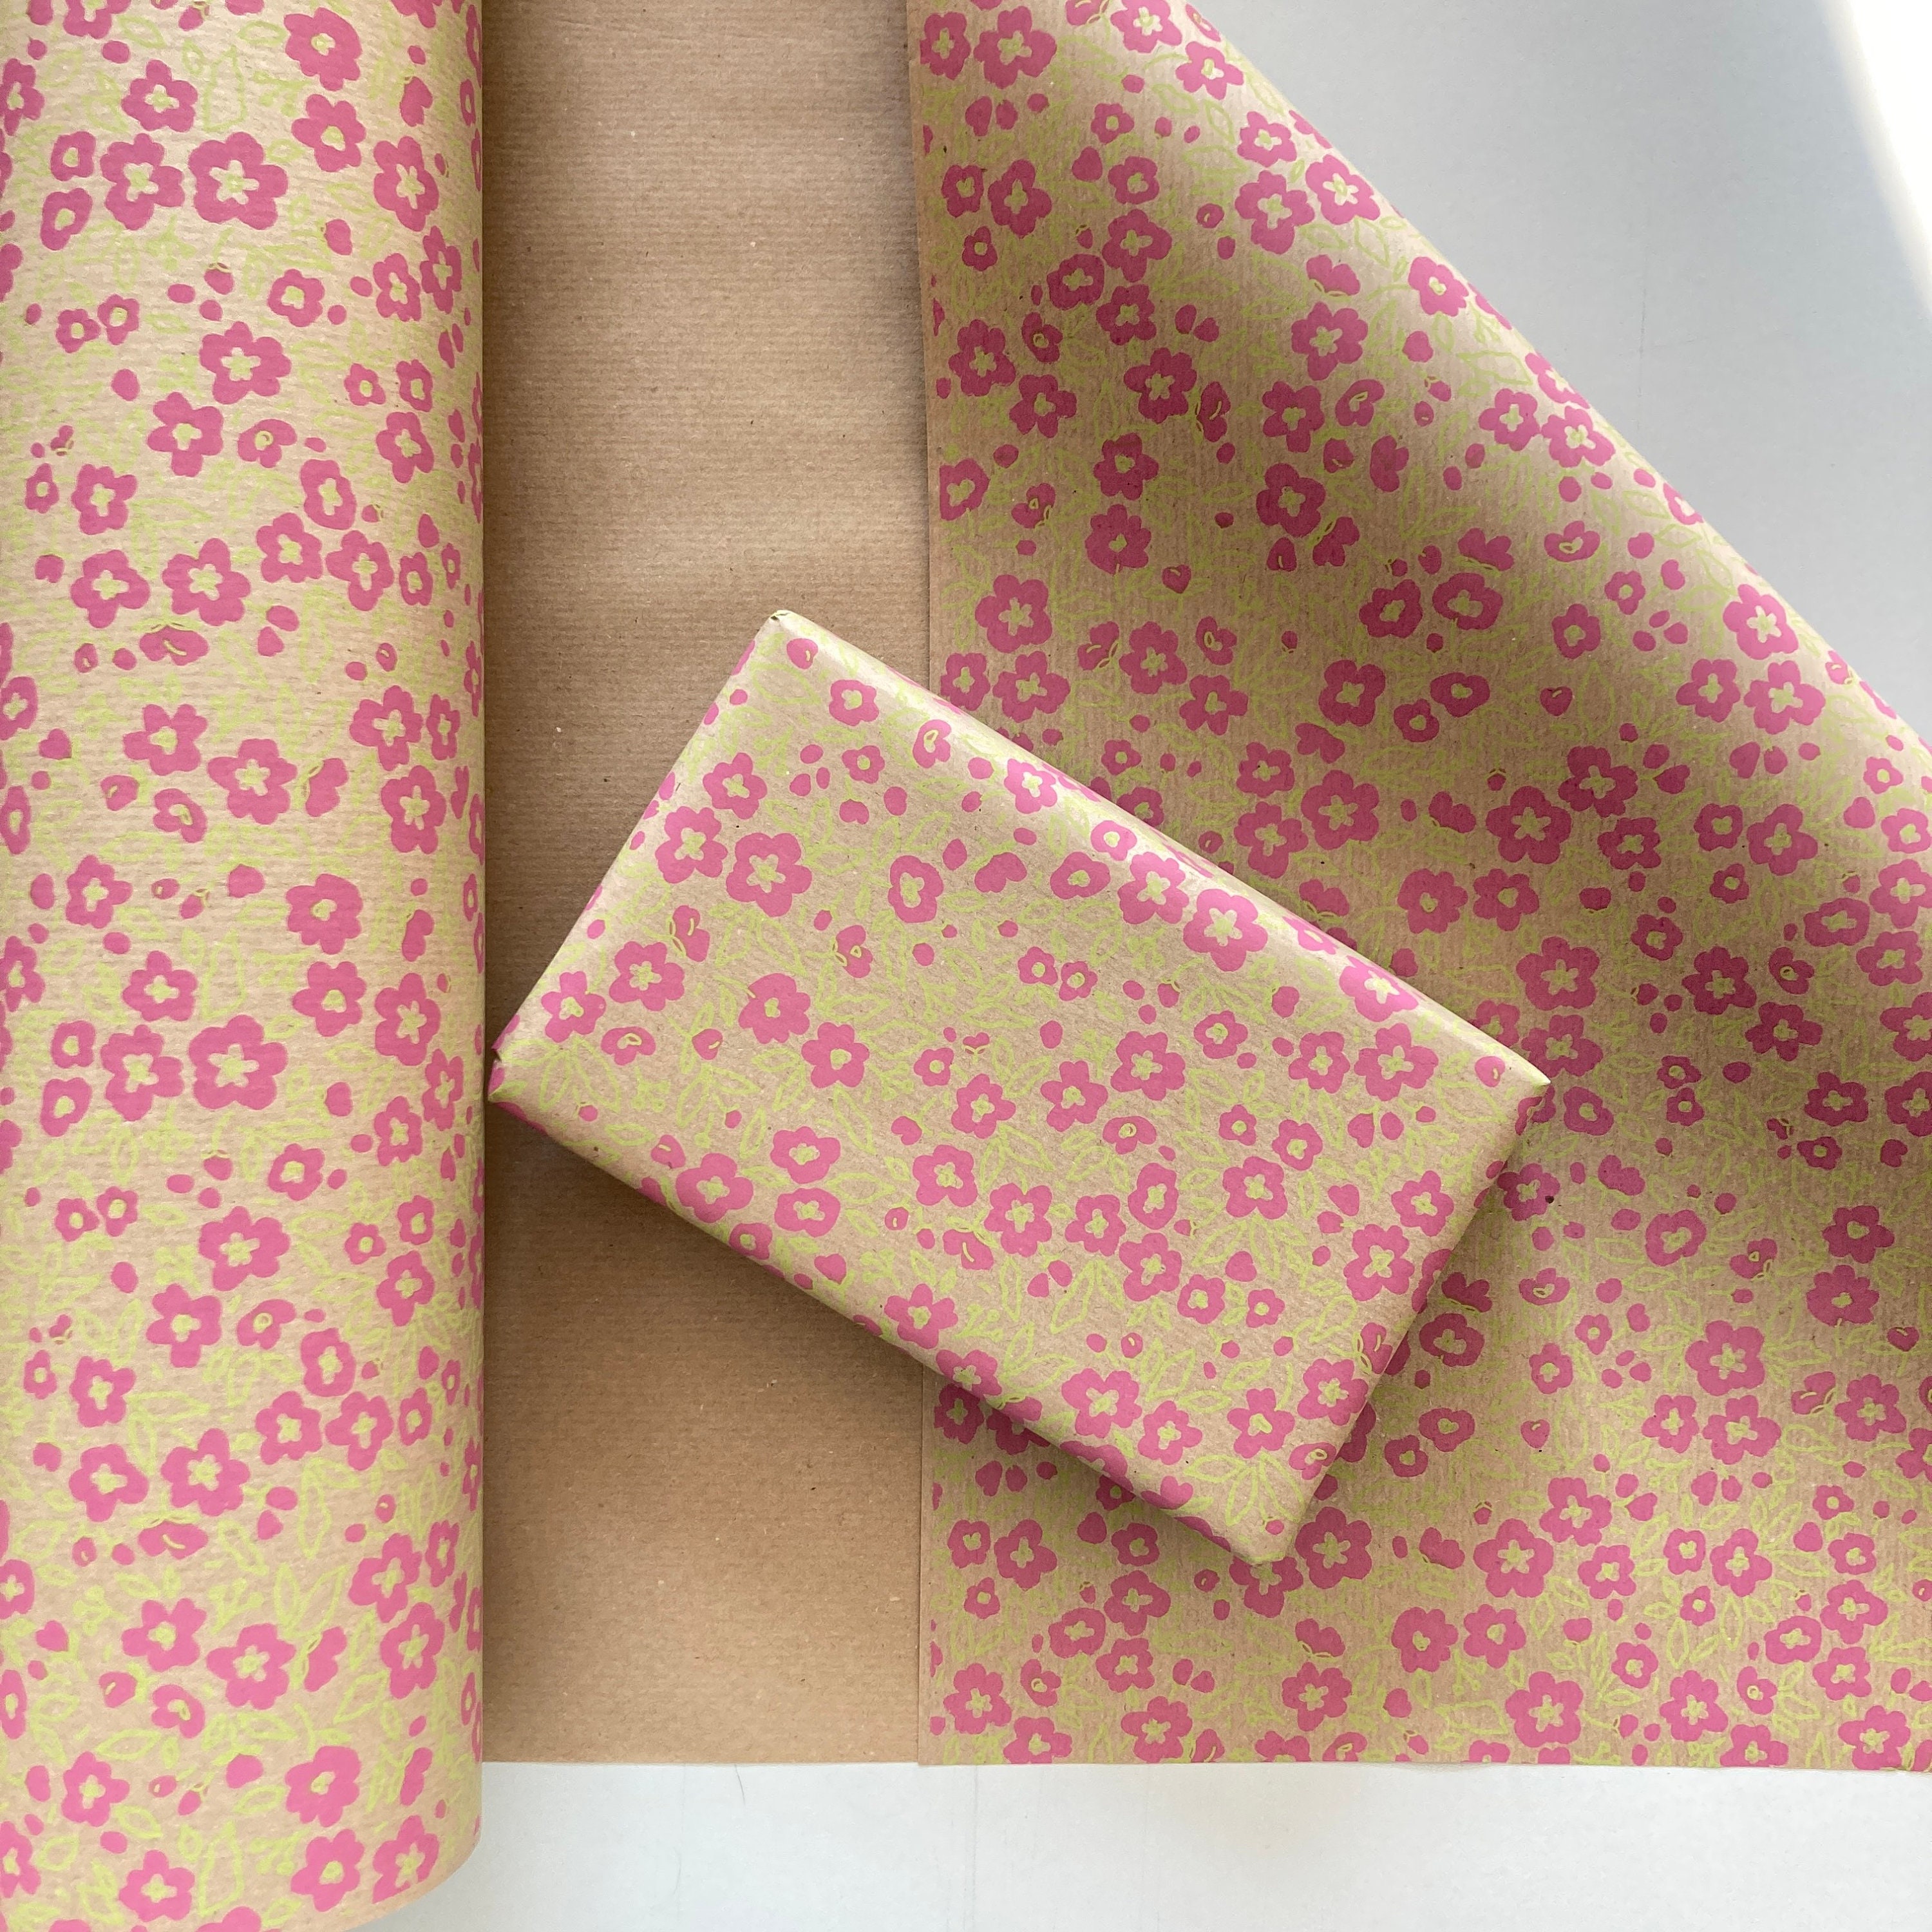  ABOOFAN 1 Roll Gift Wrapping Paper Floral Wrapping Paper Brown  Packing Paper Bouquet Wrapping Paper White Wrapping Paper Brown Kraft Paper  Handmade Gifts Craft Paper Manual Flowers : Health & Household